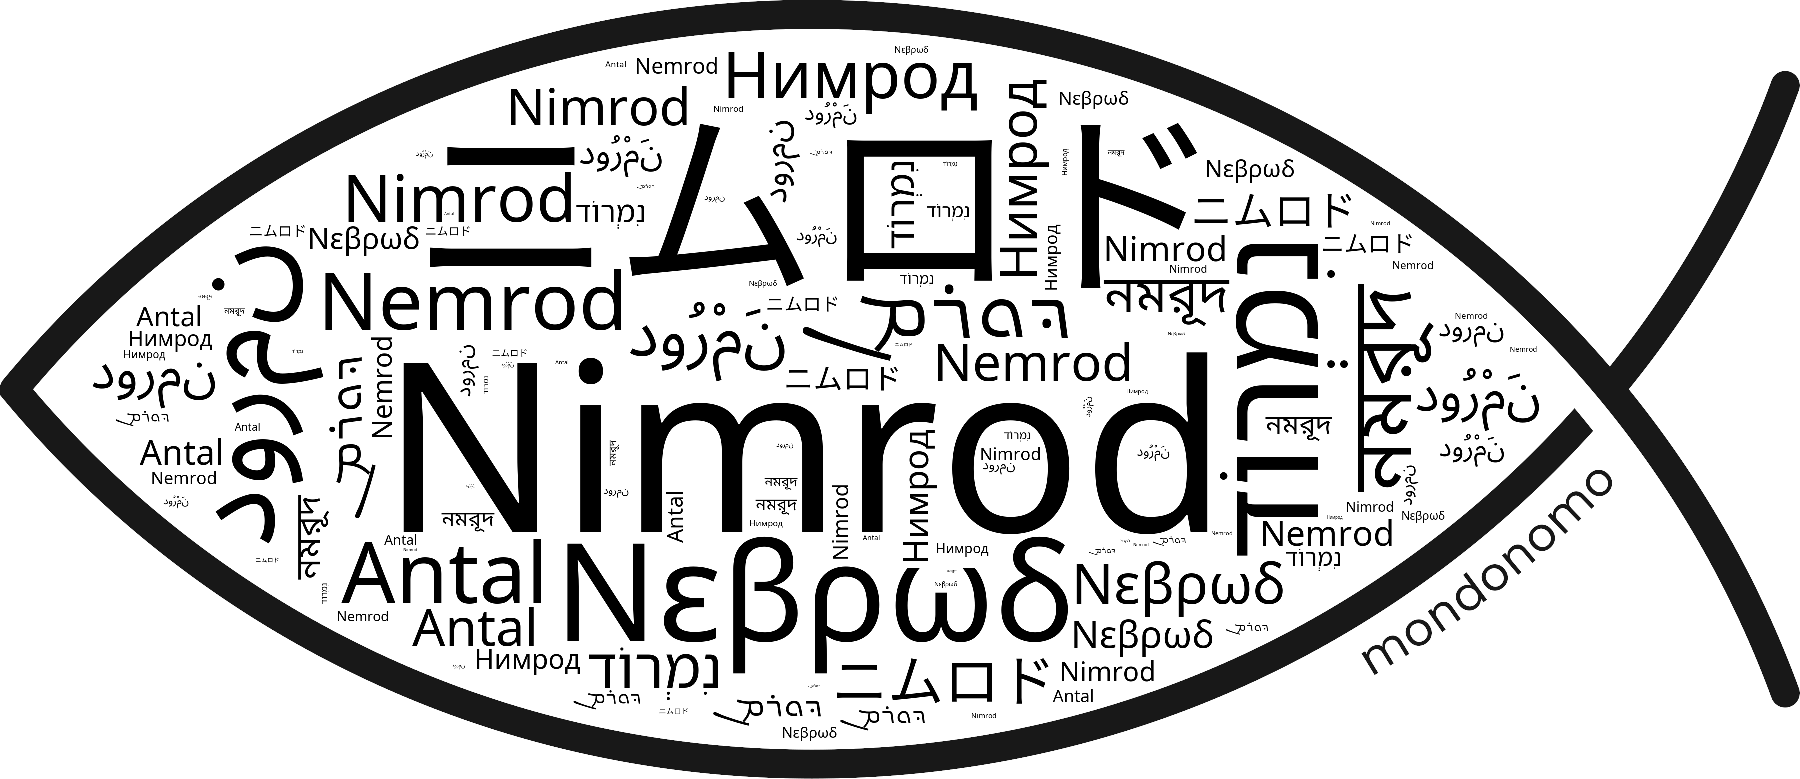 Name Nimrod in the world's Bibles